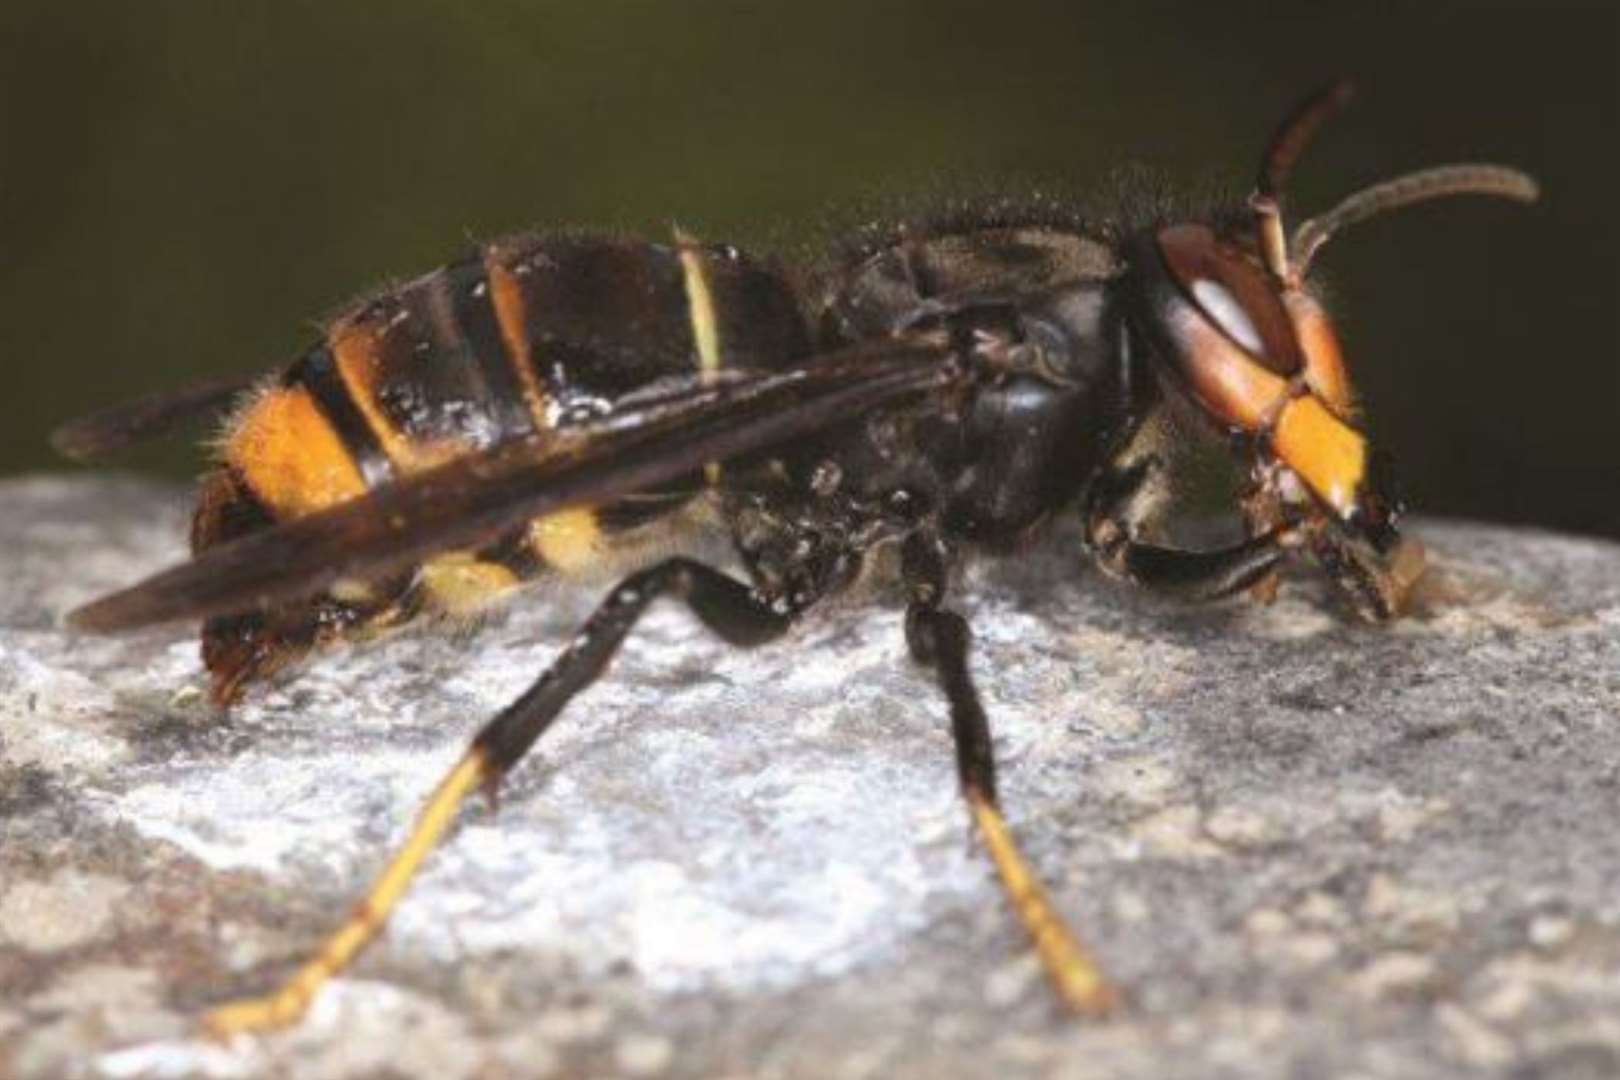 The Asian hornet has yellow legs and an orange face. Picture: John Feltwell